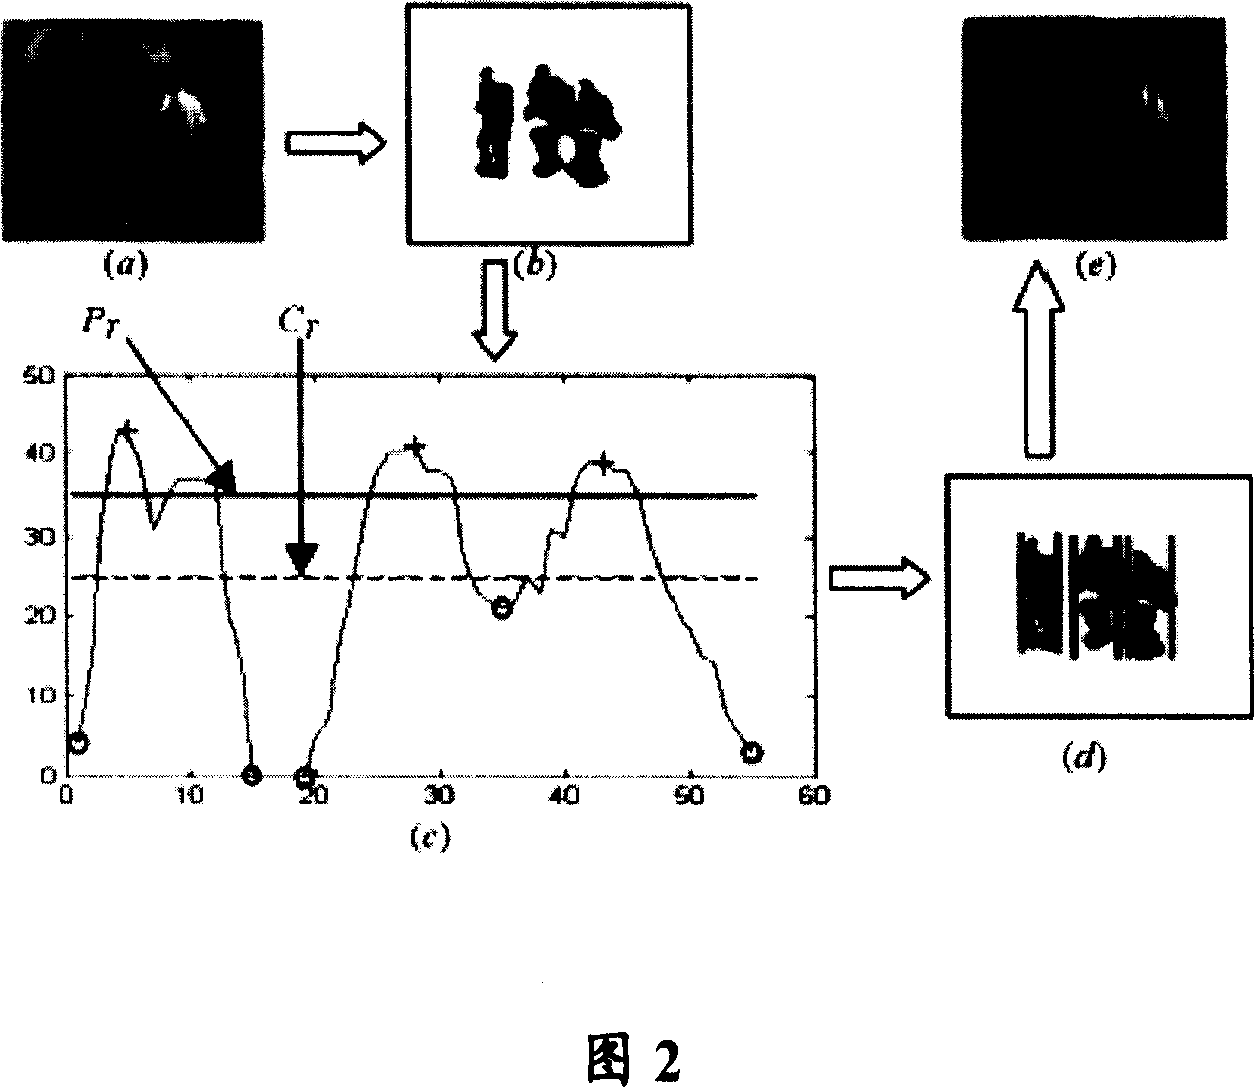 Pedestrian tracting method based on principal axis marriage under multiple vedio cameras